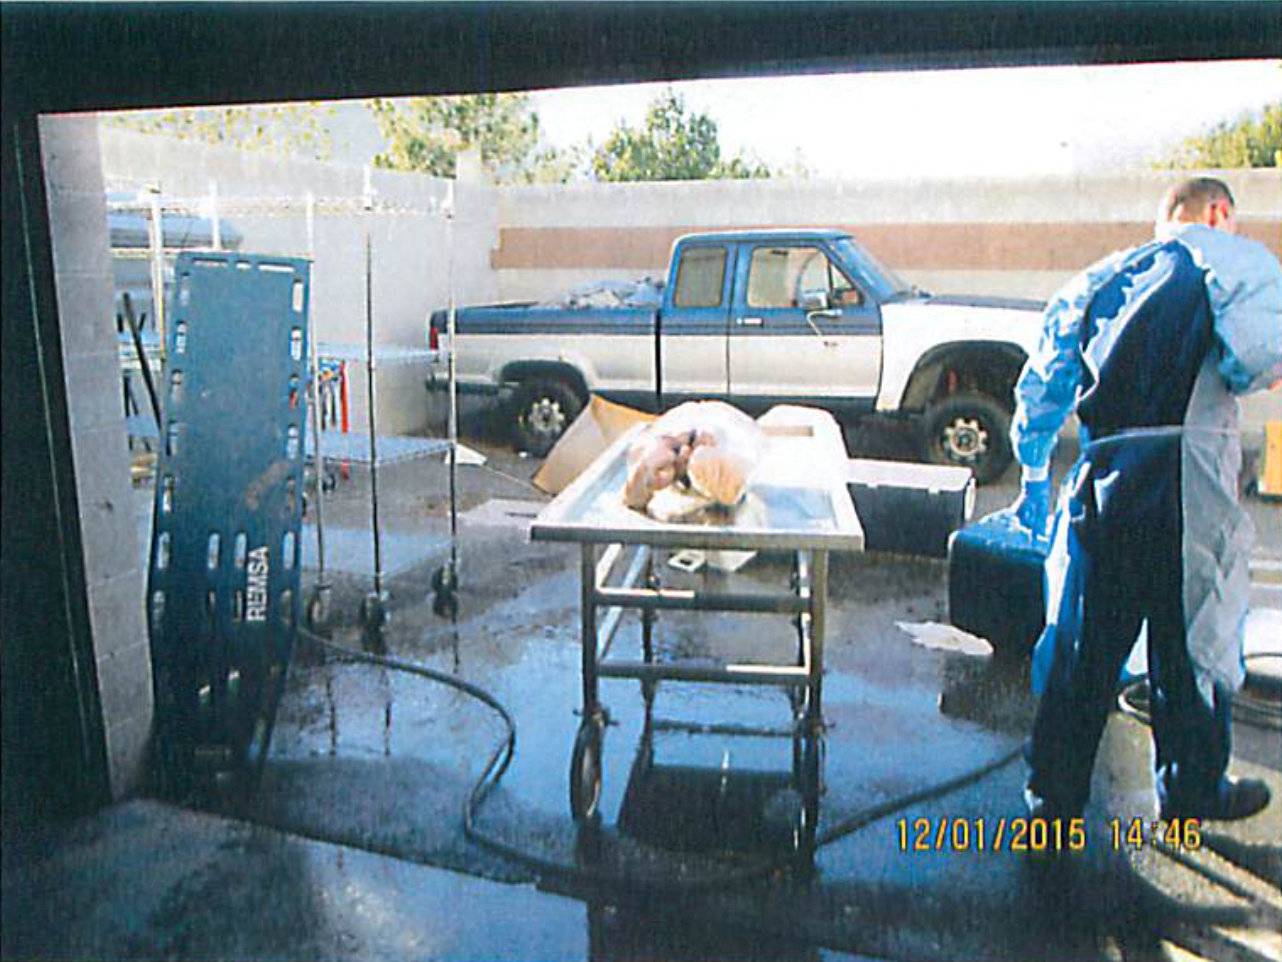 Officials wheel away a stretcher containing a human torso found being thawed with a hose at a facility rented by Southern Nevada Donor Services in Las Vegas, Nevada, U.S. in this handout photo